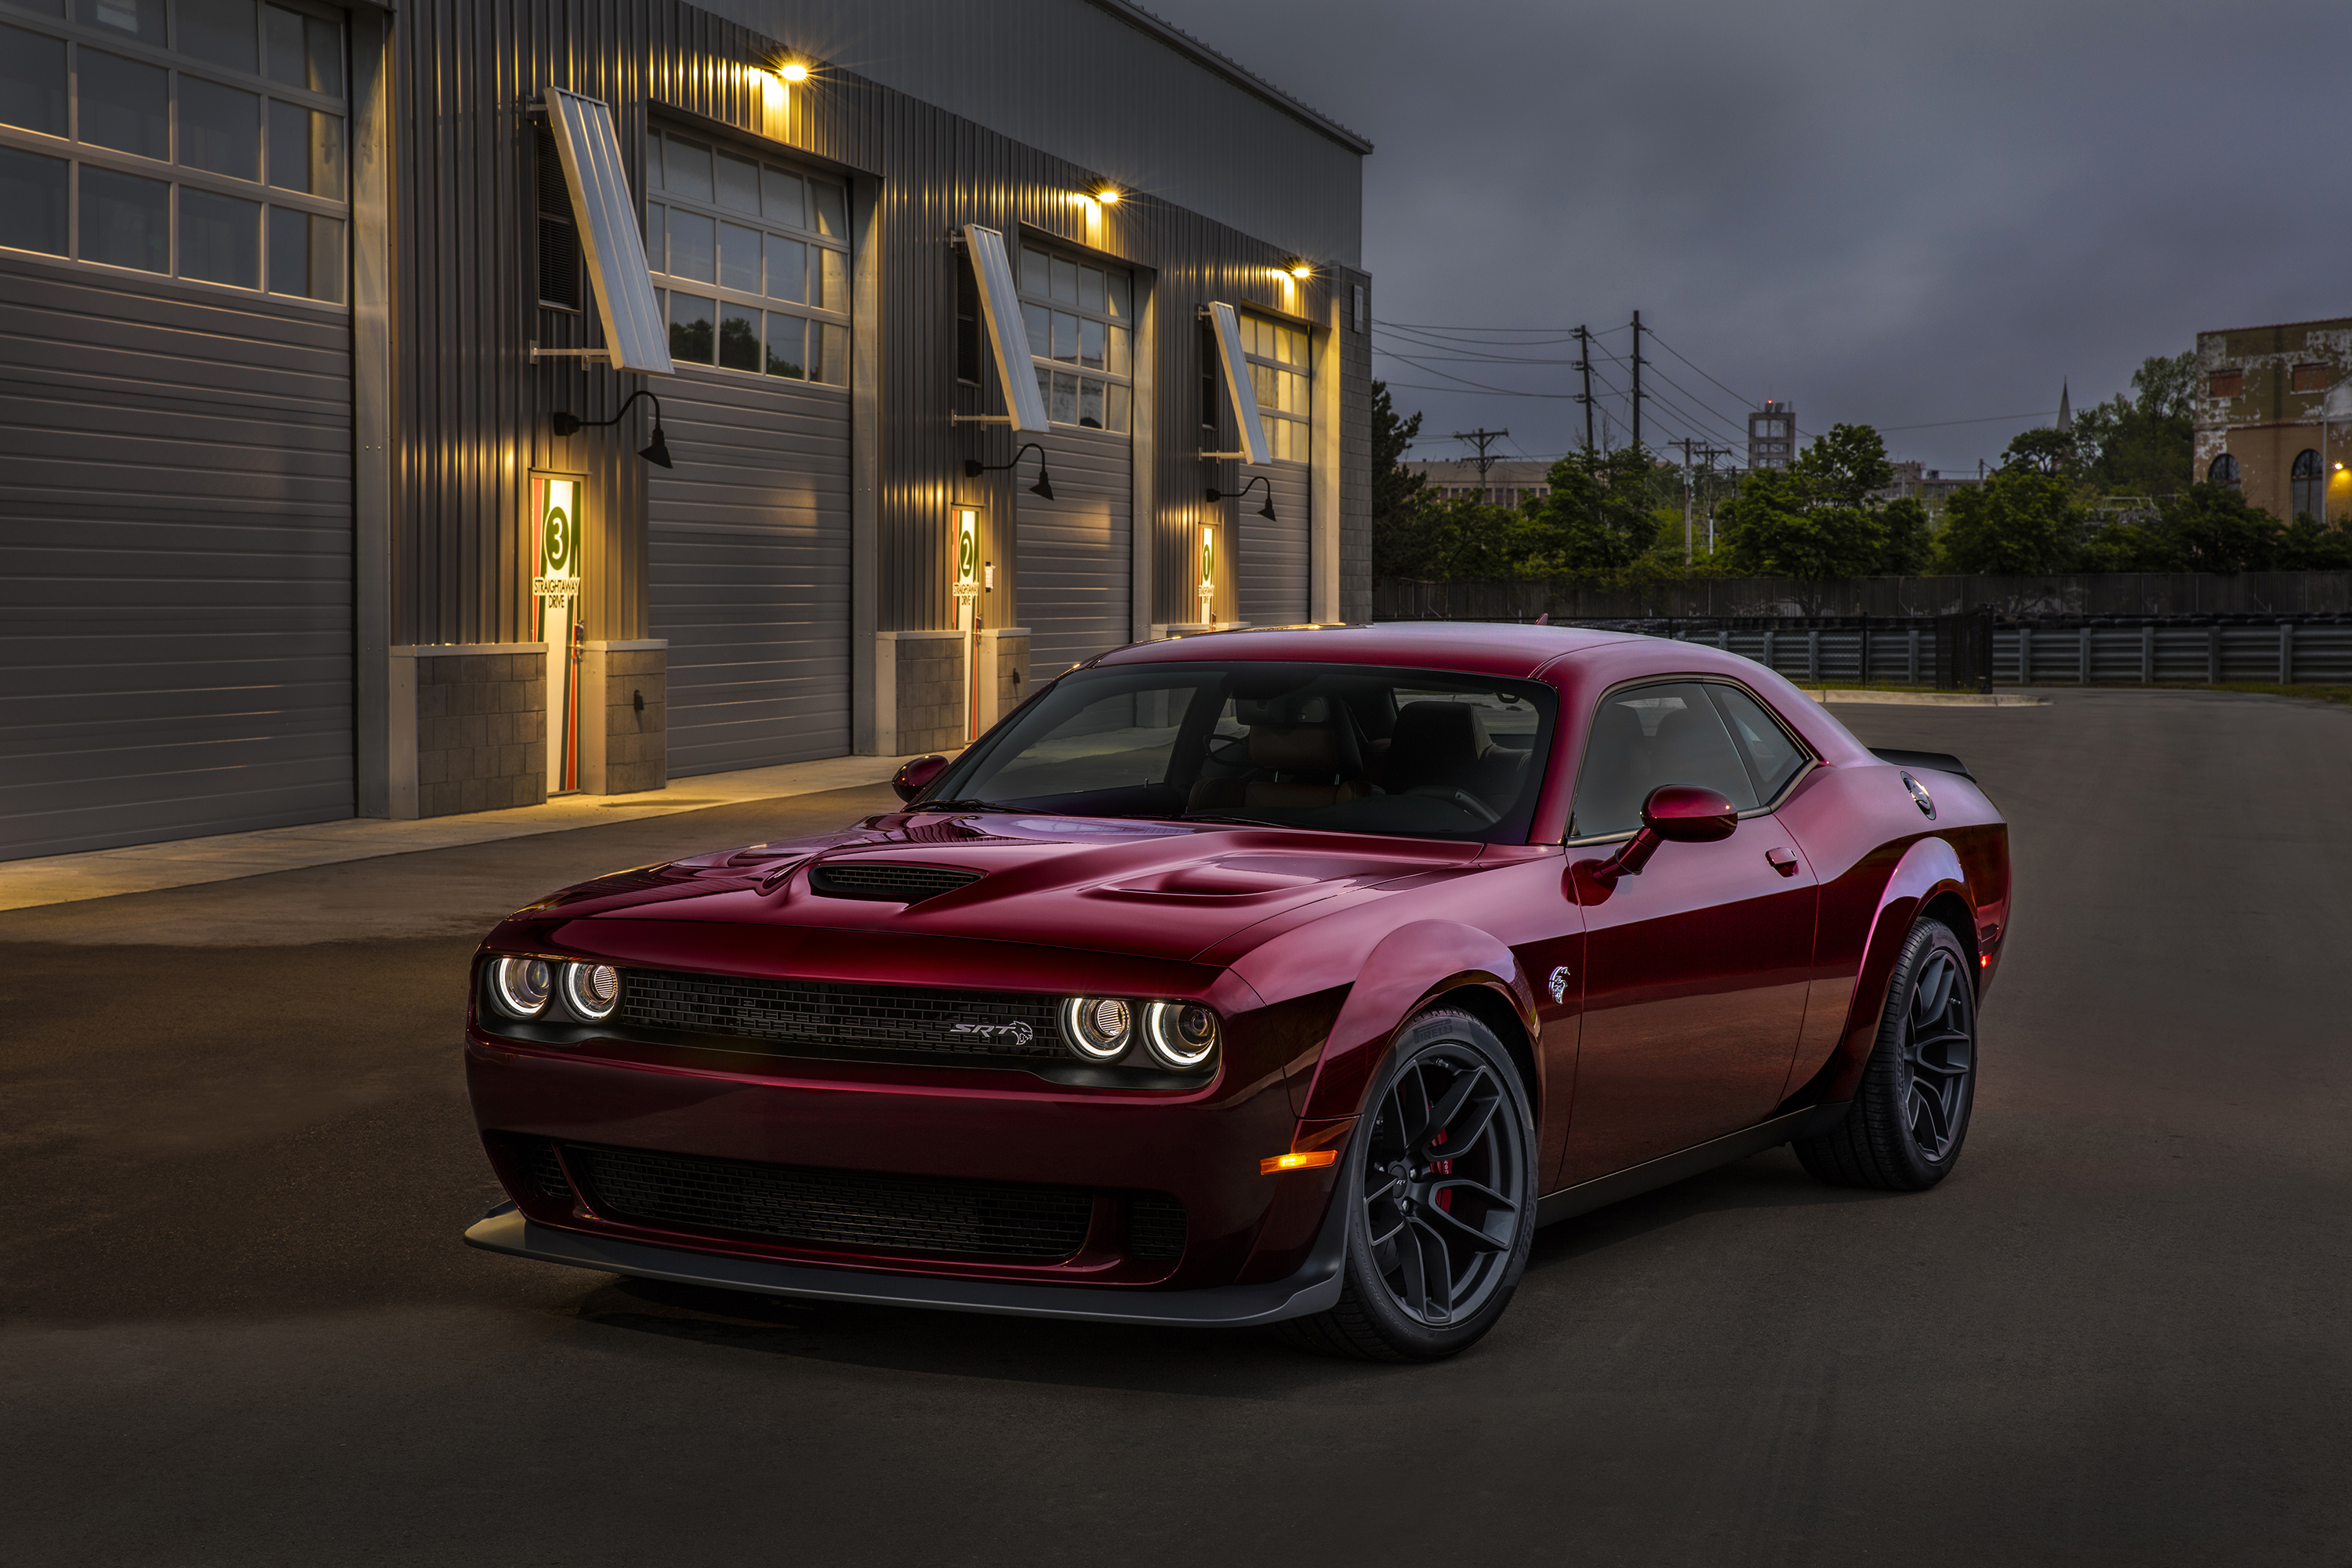 Car Dodge Dodge Challenger Dodge Challenger Srt Hellcat Muscle Car Red Car Vehicle 3000x2000